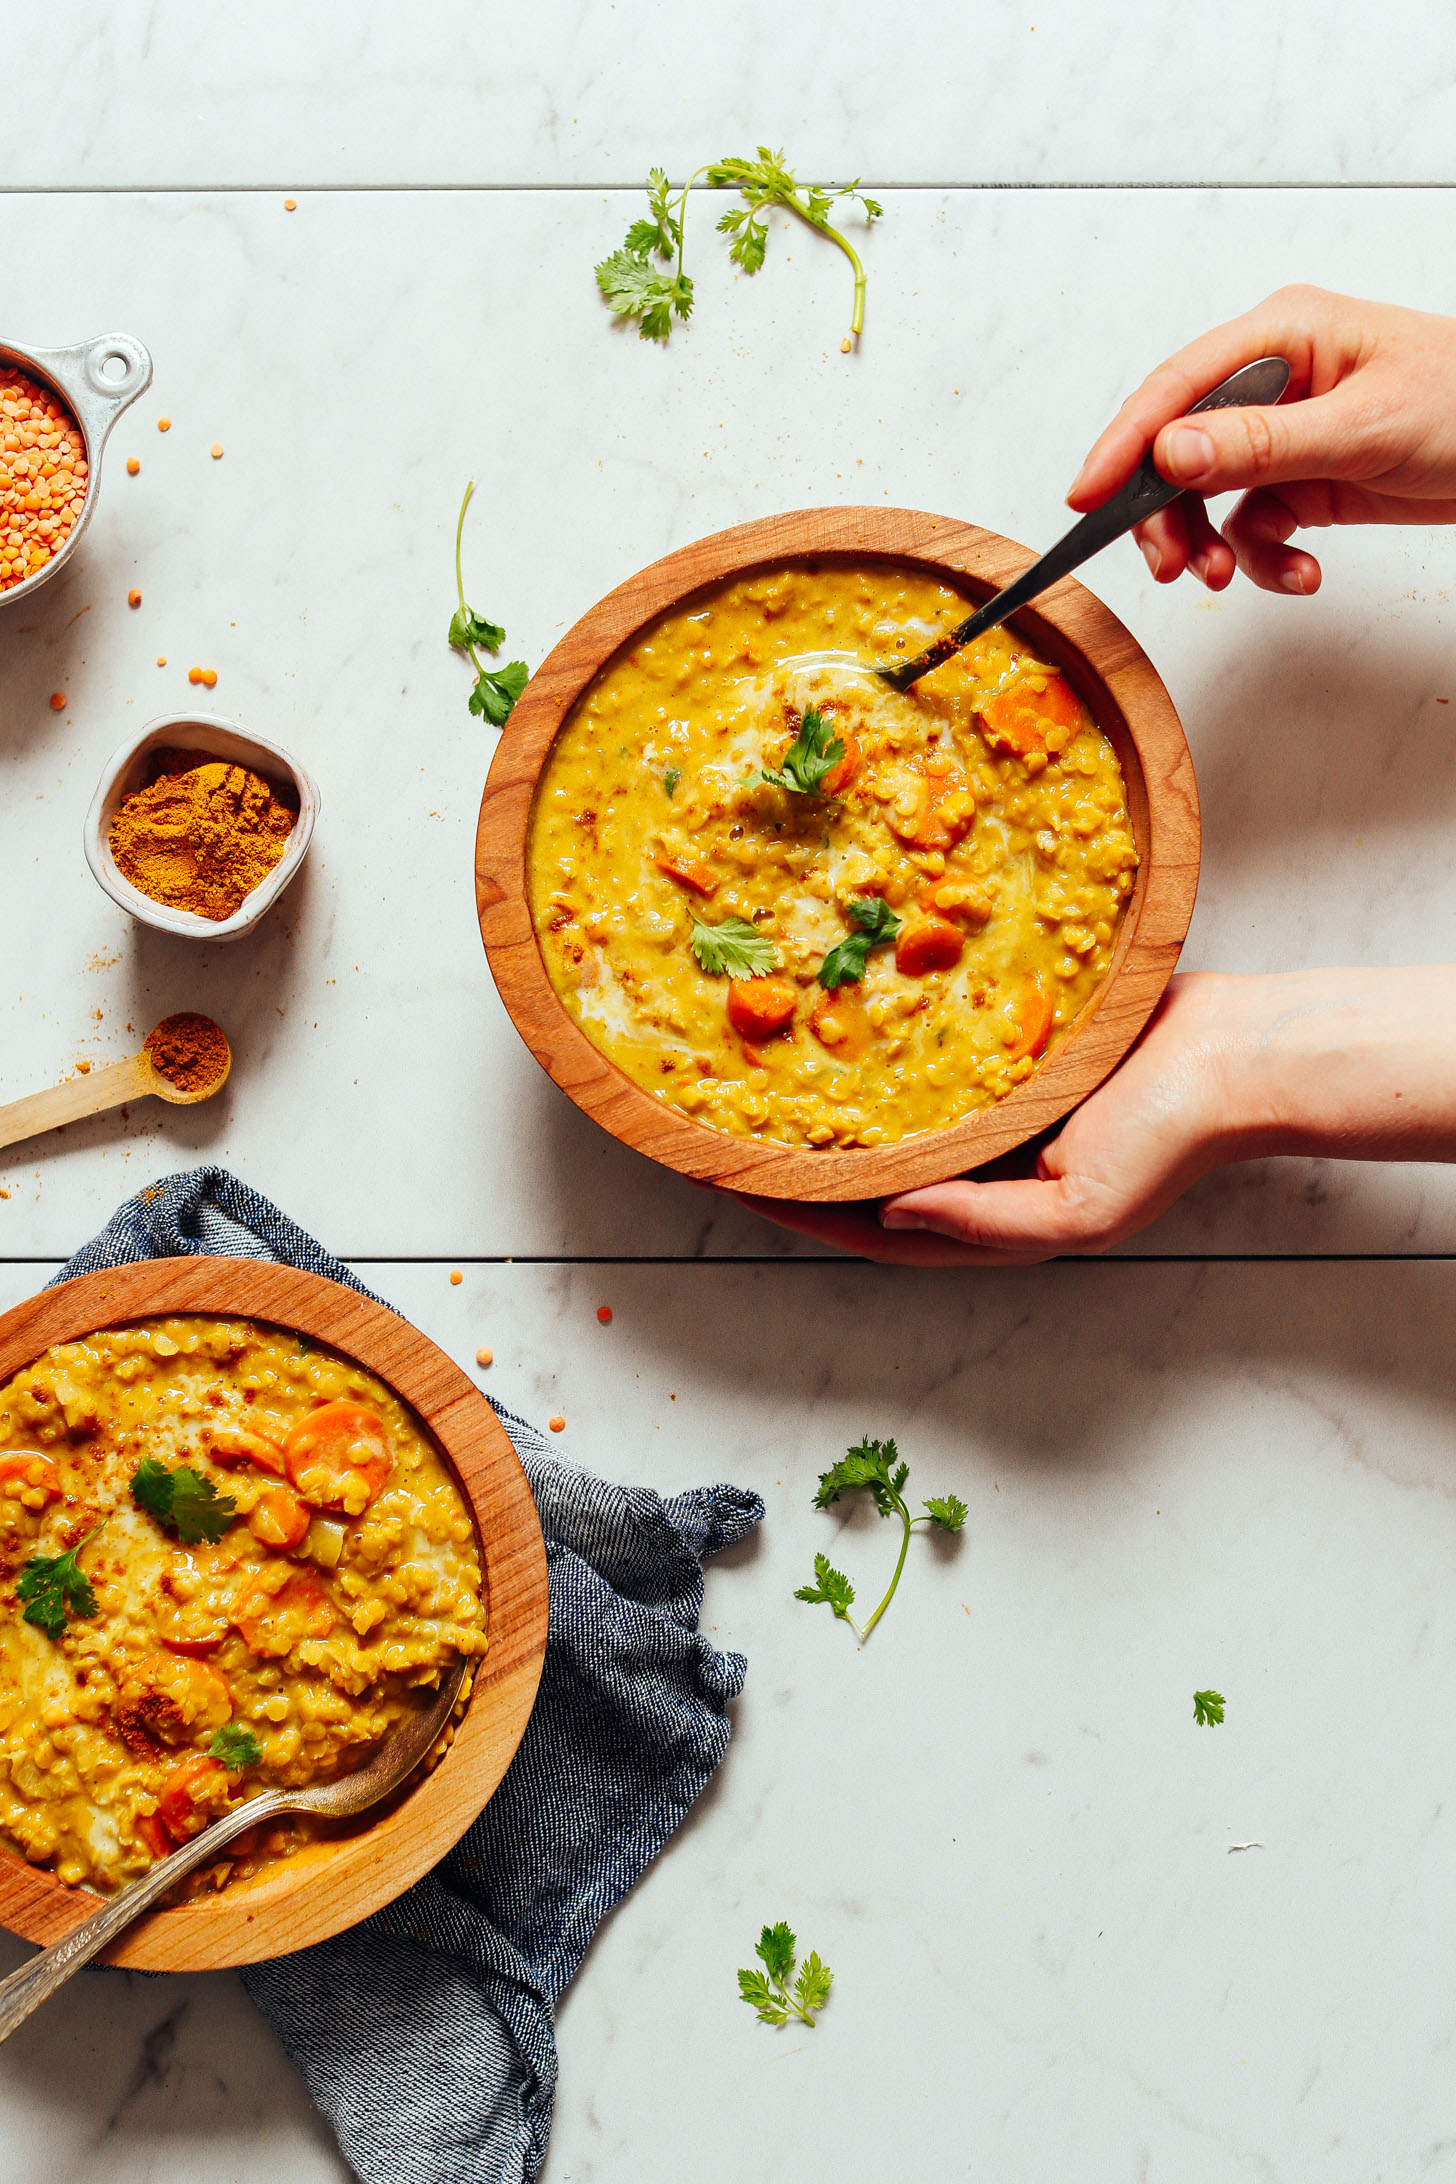 An overhead shot of two bowls of golden curried lentil soup with hands holding one bowl and taking a scoop